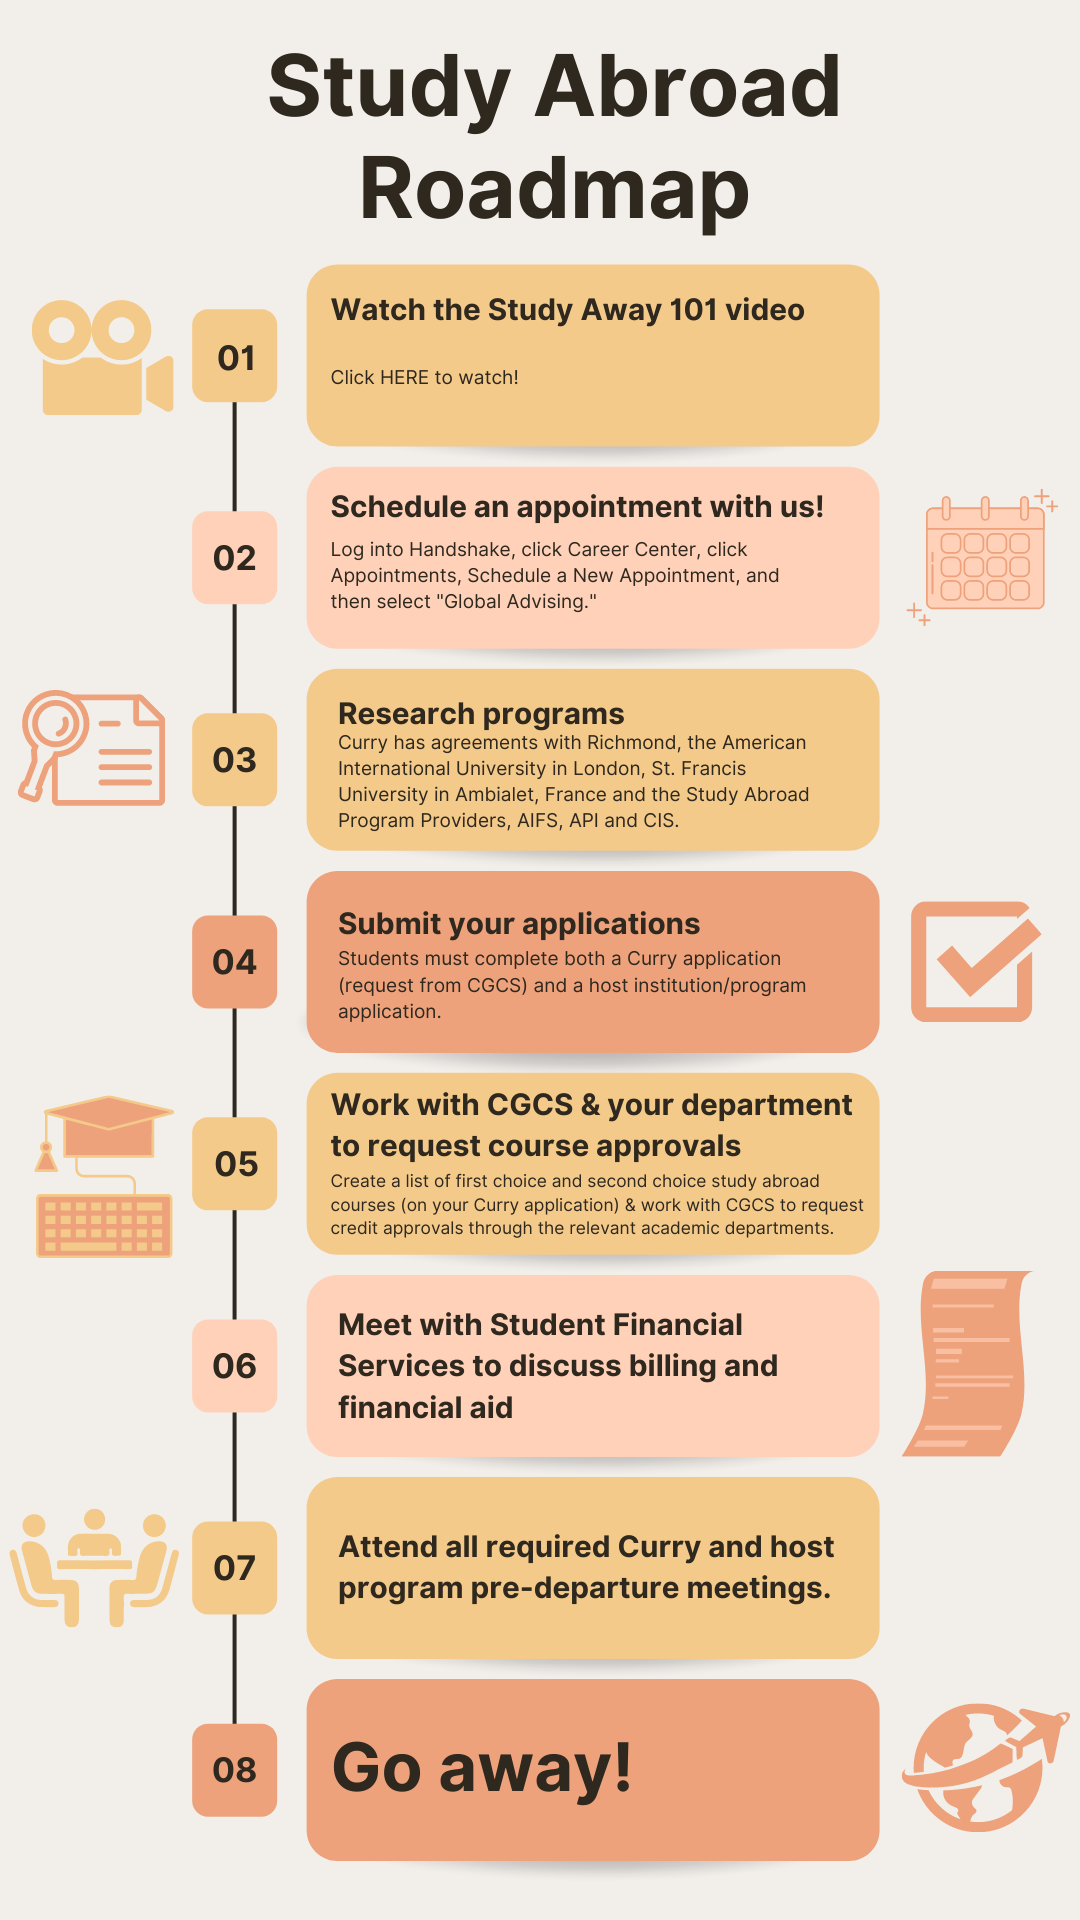  1. Watch the Study Away 101 video 2. Schedule an appointment with us! 3. Research Programs 4. Submit your application(s) 5. Work with the CGCS & your department to request course approvals 6. Meet with Student Financial Services to discuss billing and financial aid 7. Attend pre-departure meetings 8. Go away!